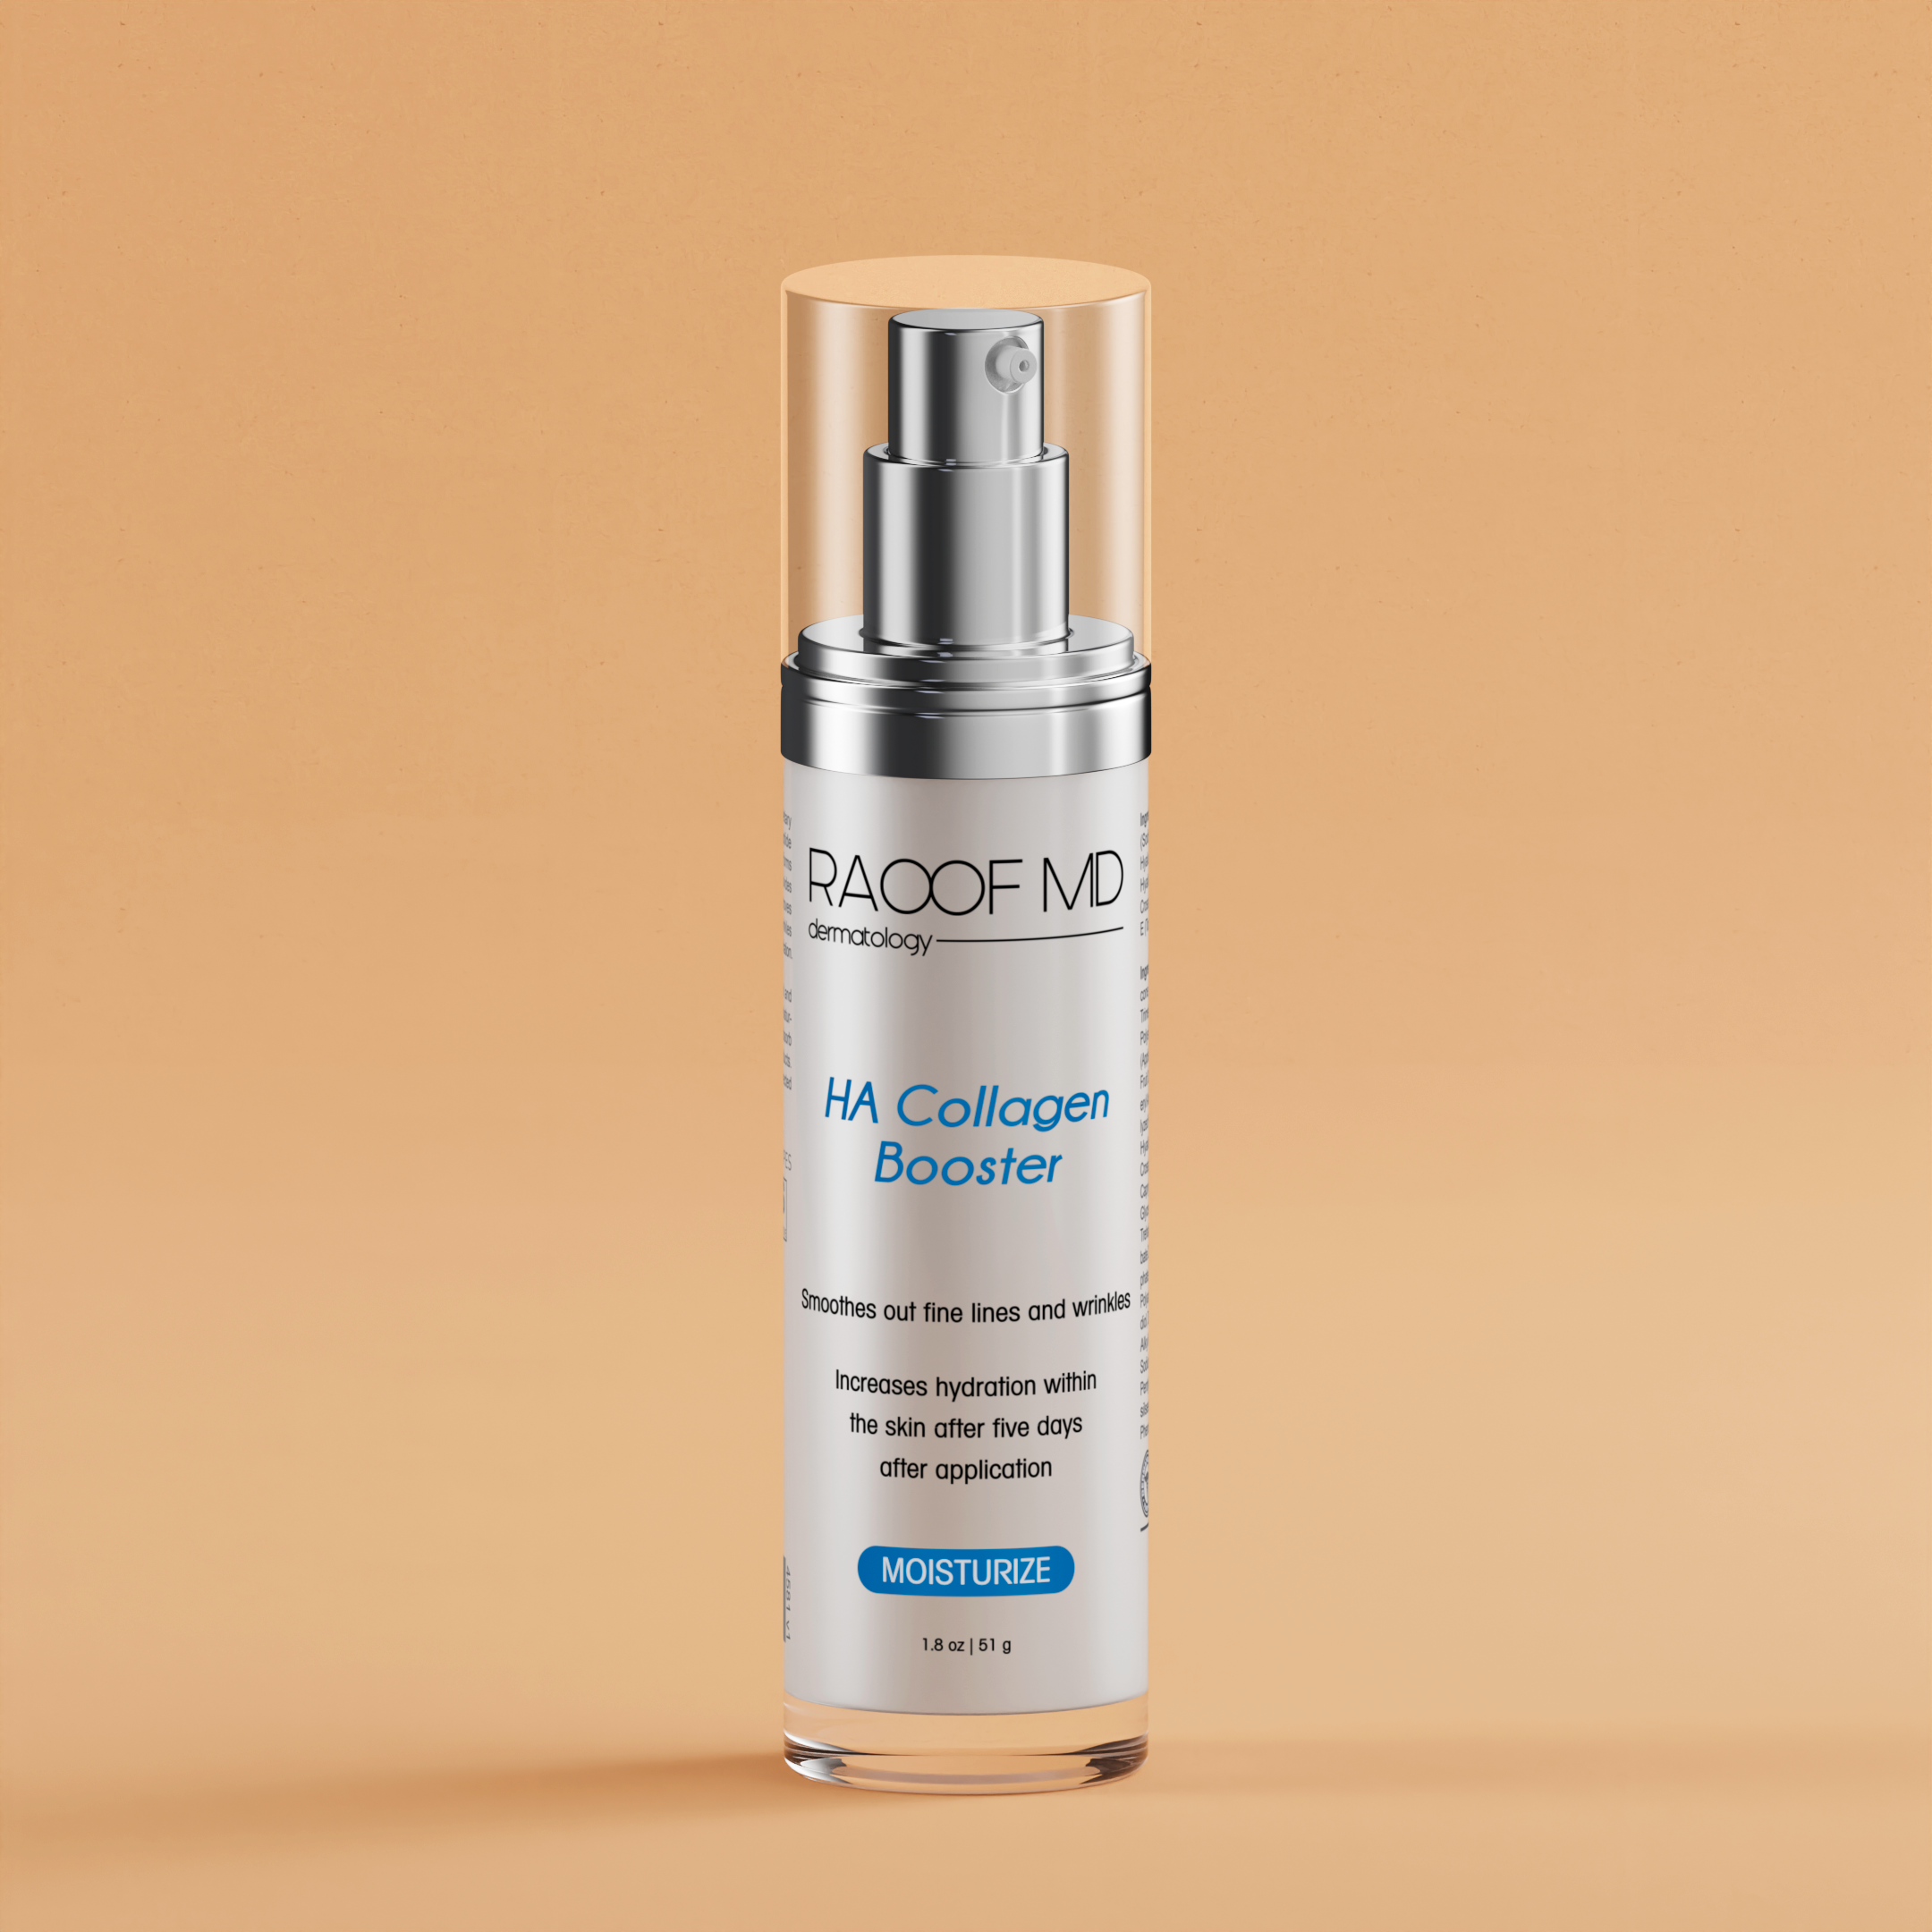 HA Collagen Booster by RAOOF MD dermatology